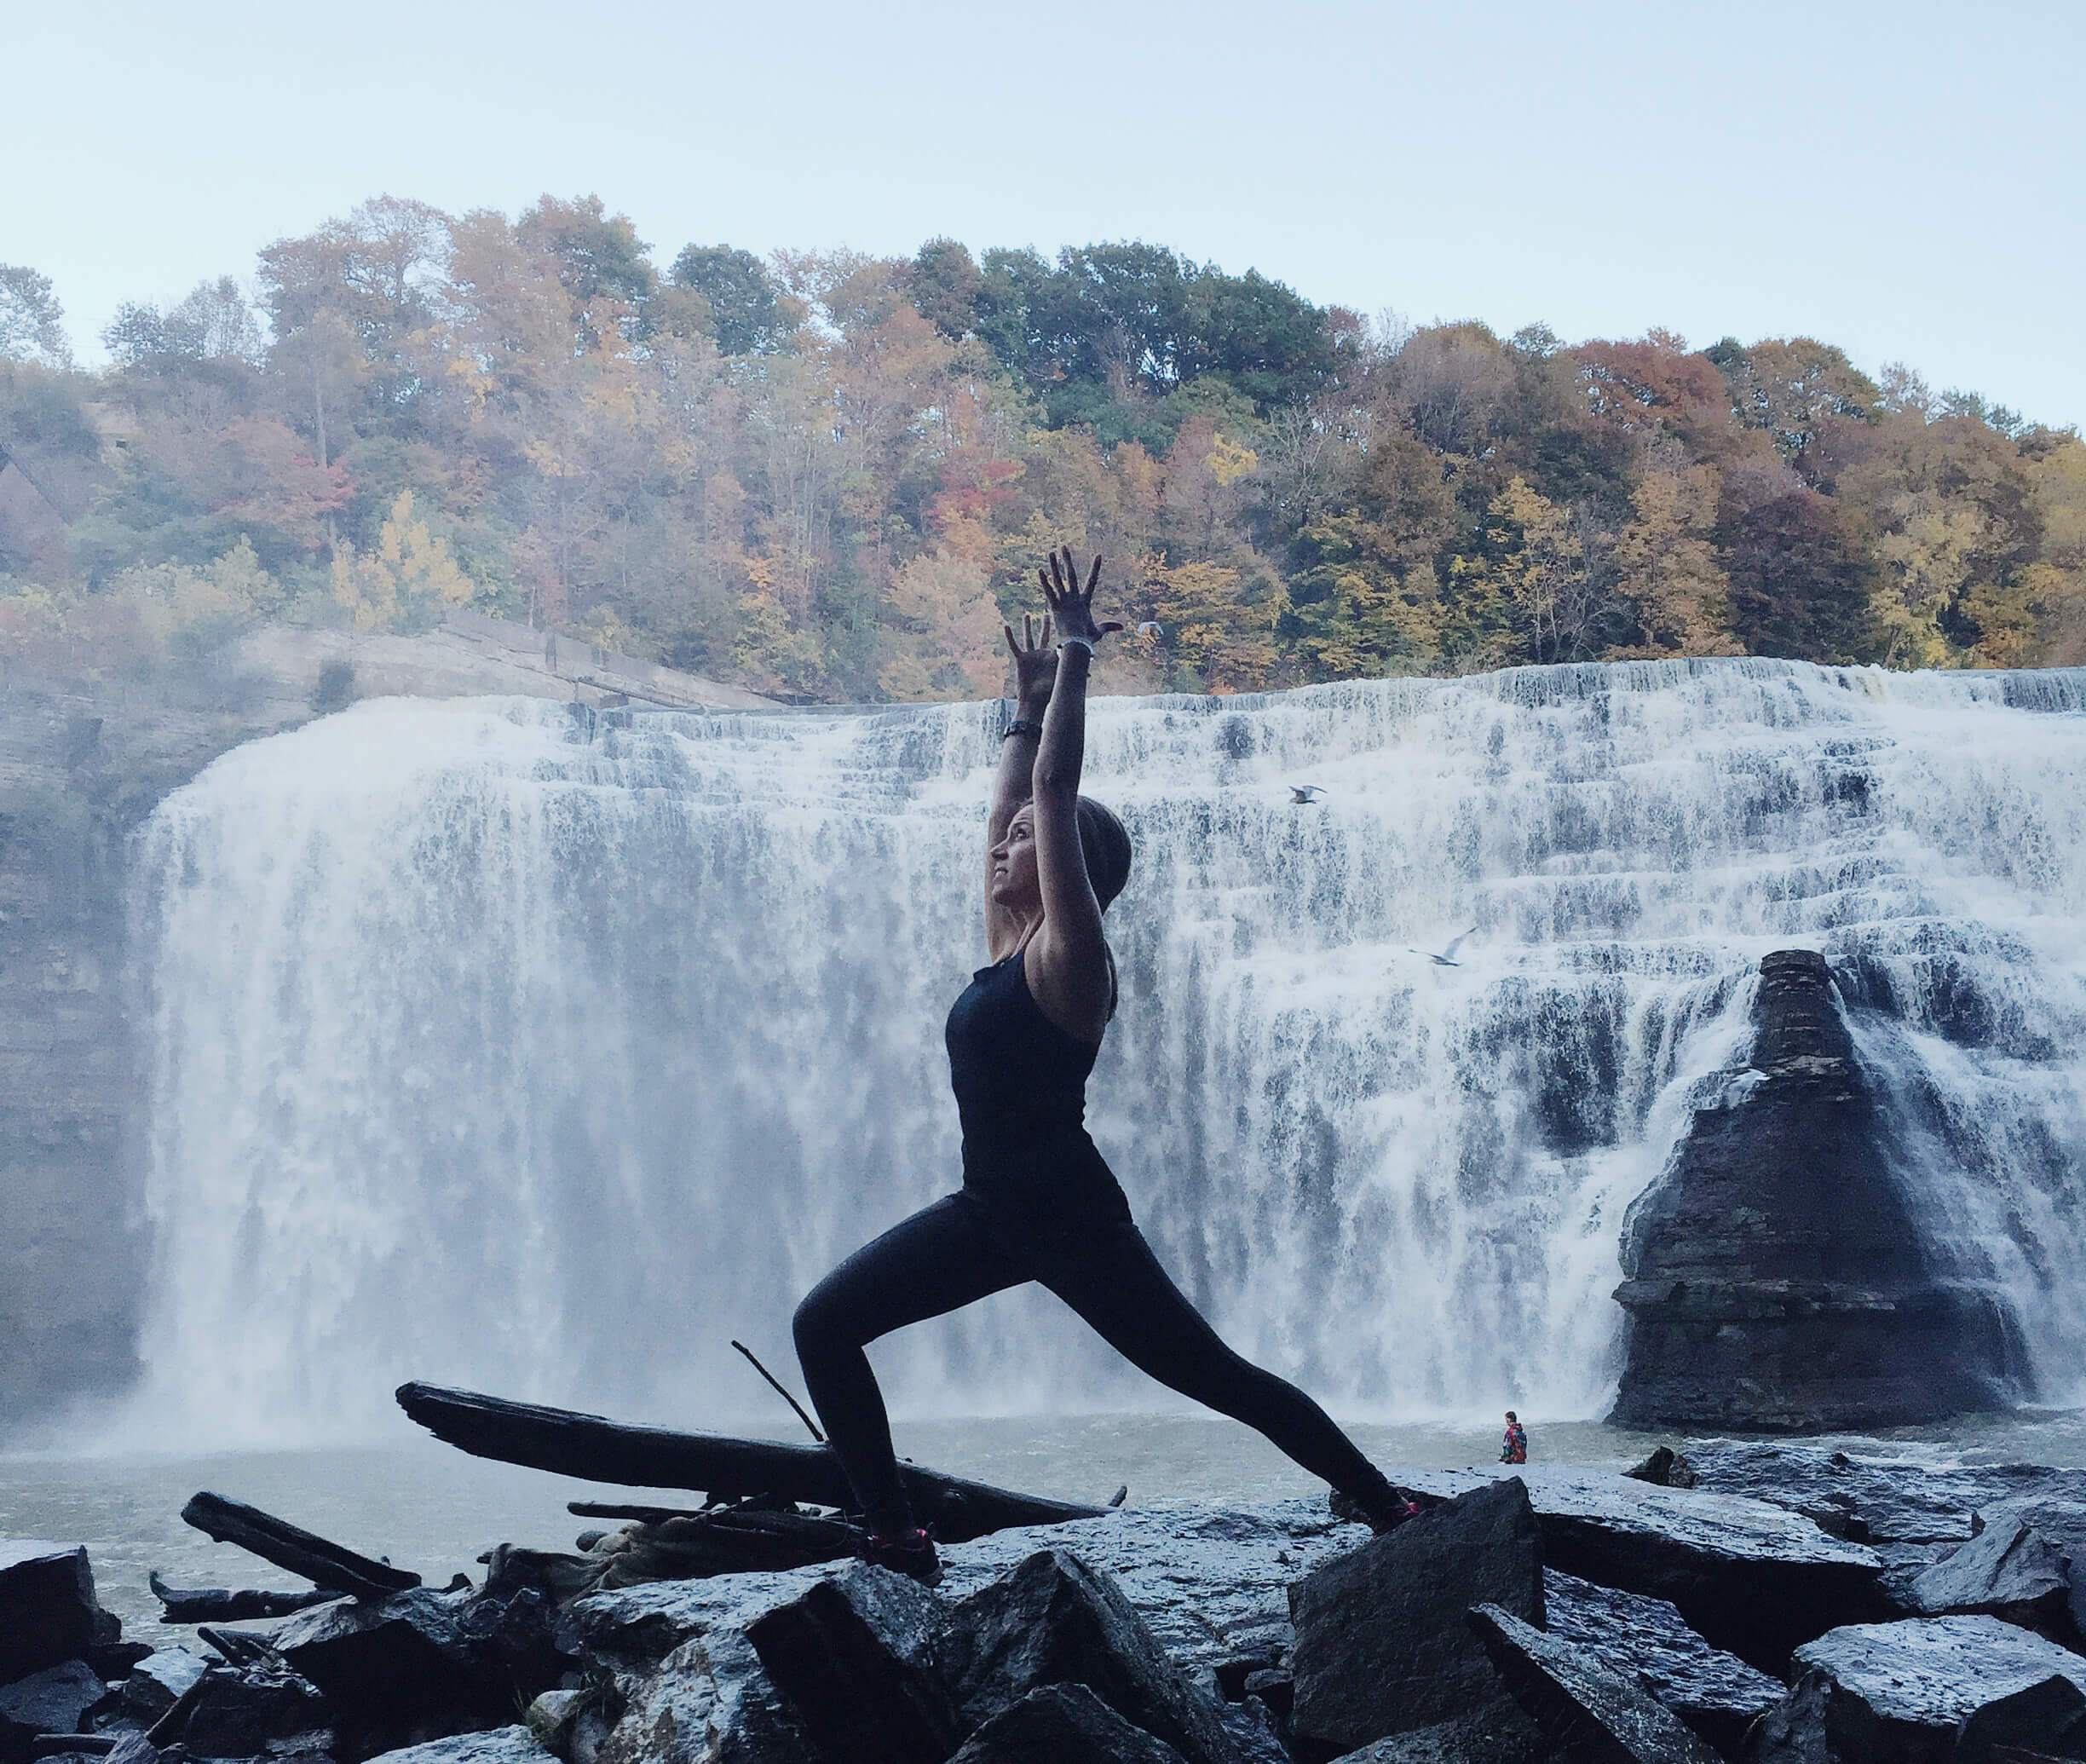 Yoga girl and adventurer Nicole Kazimer has the best memories during snowstorms.